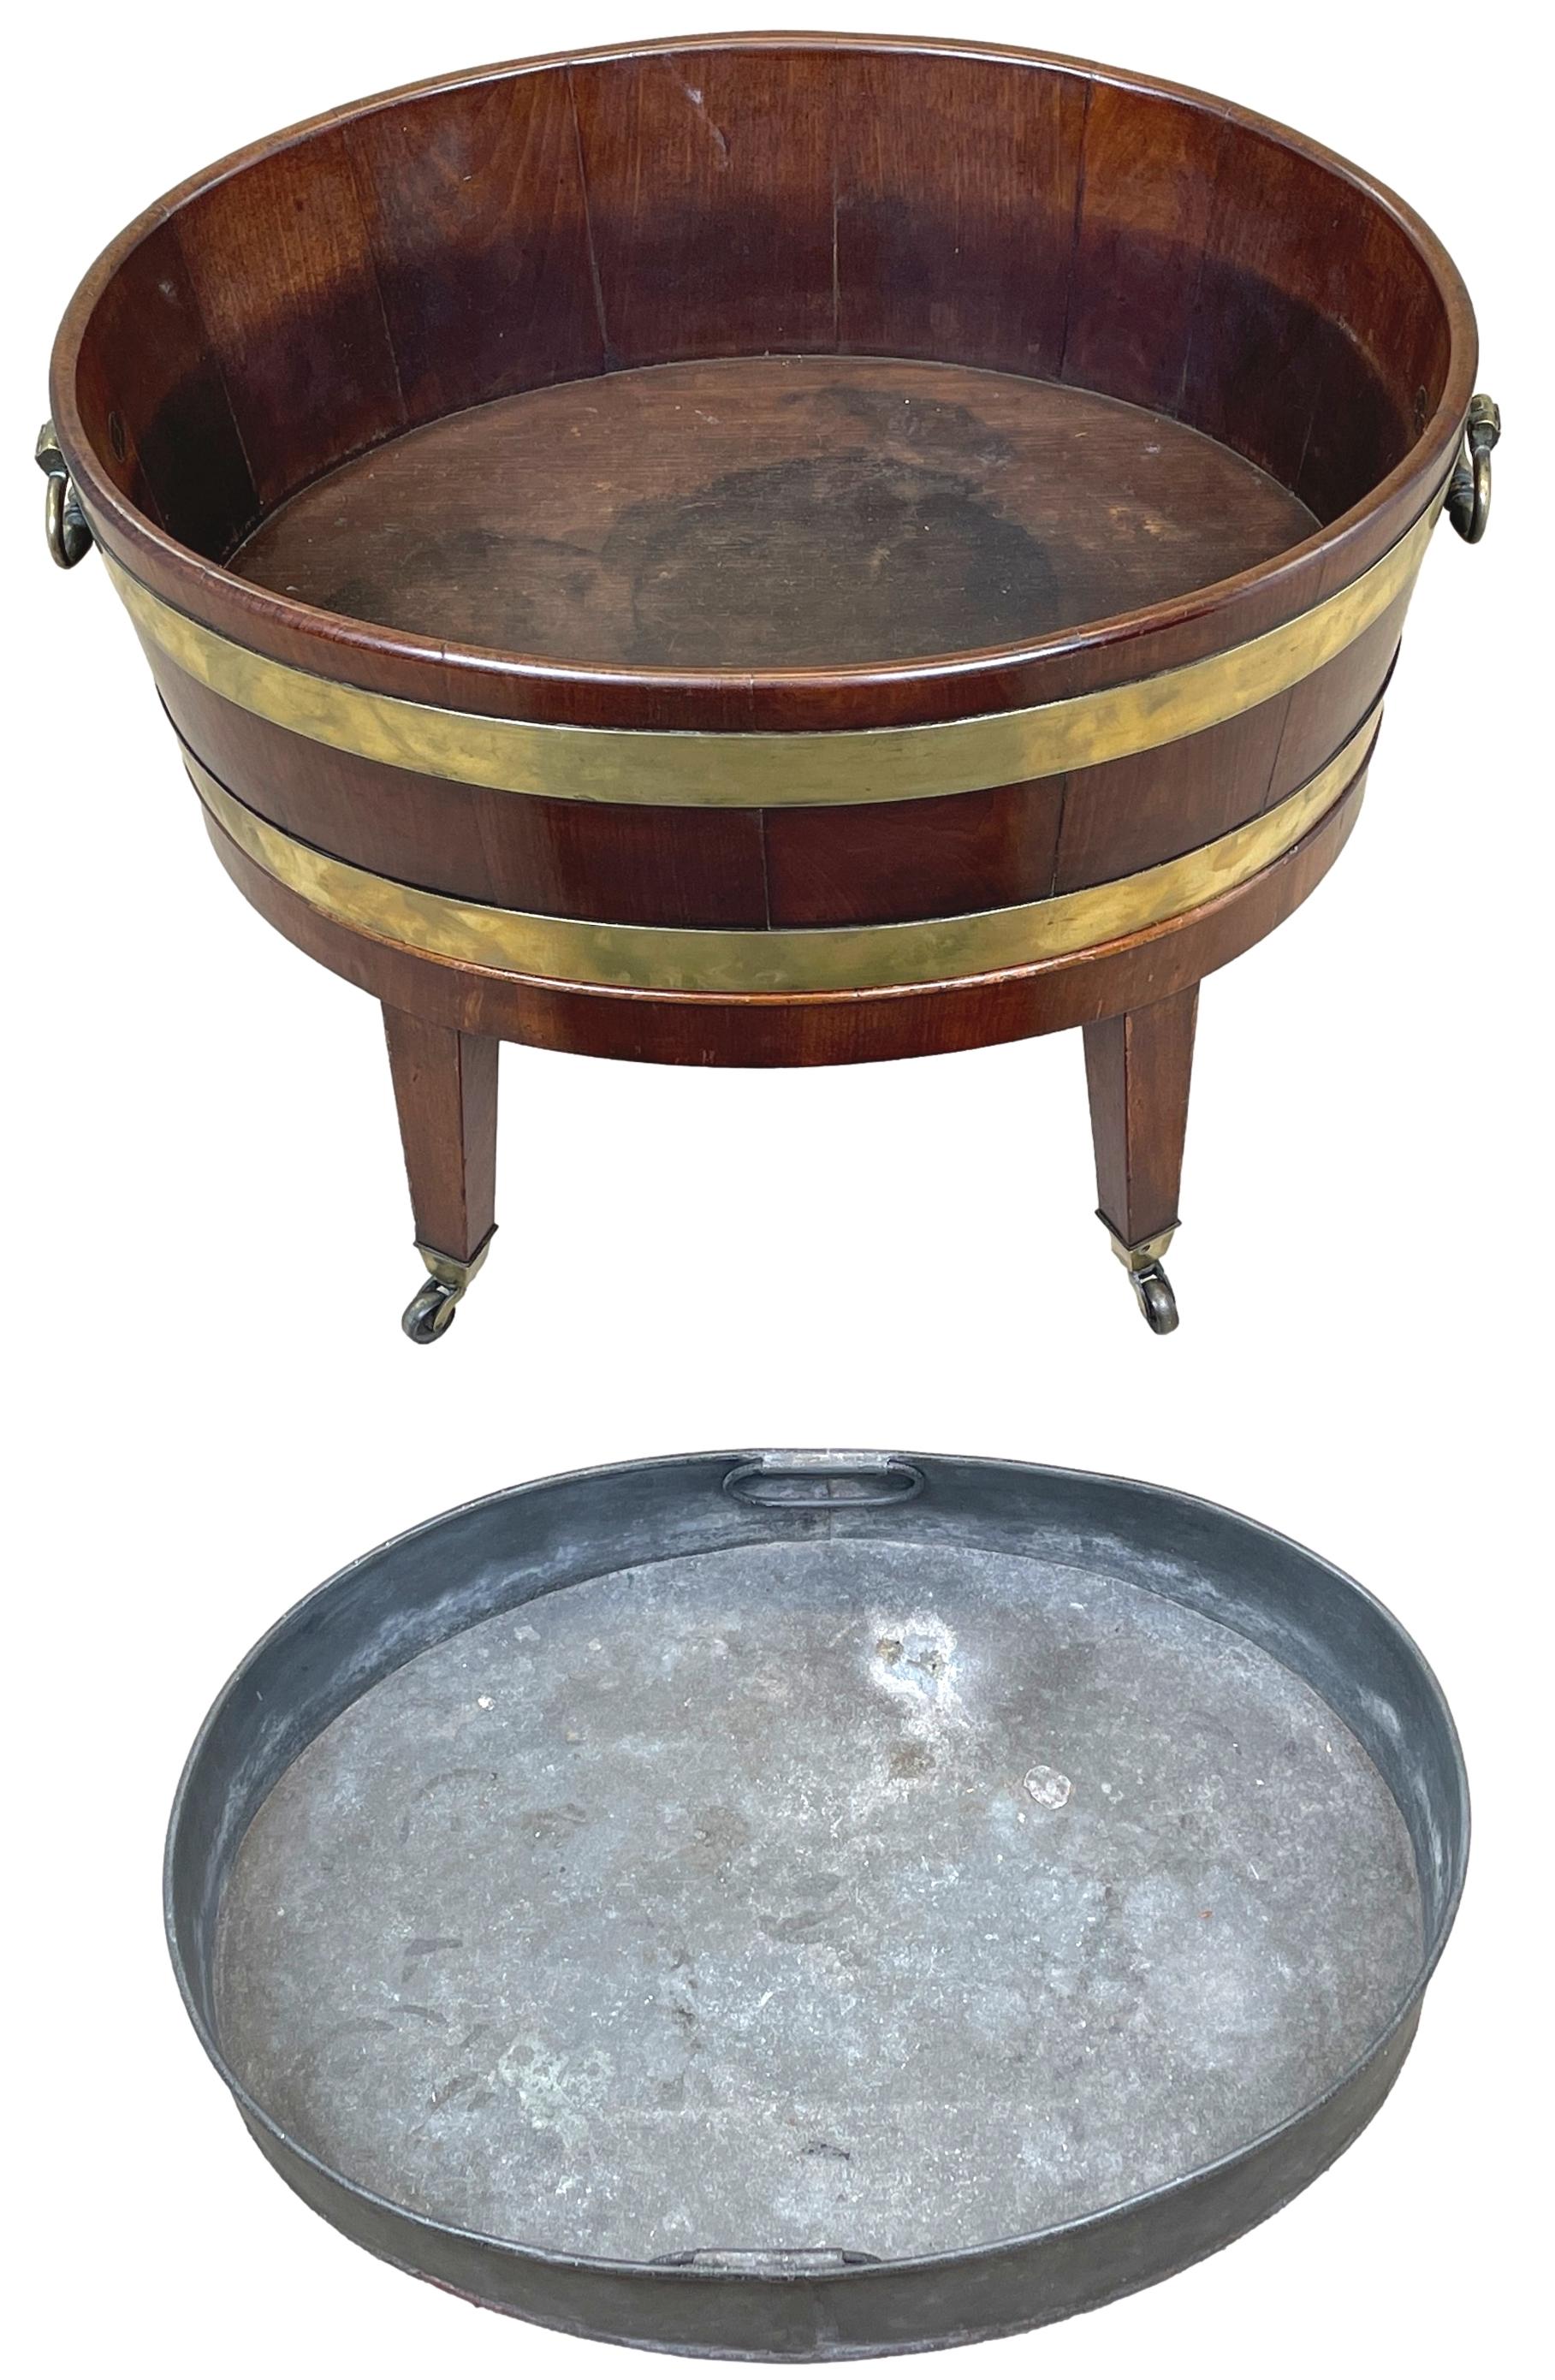 A Very Attractive 18th Century Georgian Mahogany Oval Shaped Open Wine Cooler Retaining Good Colour And Patina, With Original Brass Bound Decoration And Original Brass Handles, Raised On Elegant Original Stand With Square Tapered Legs And Original